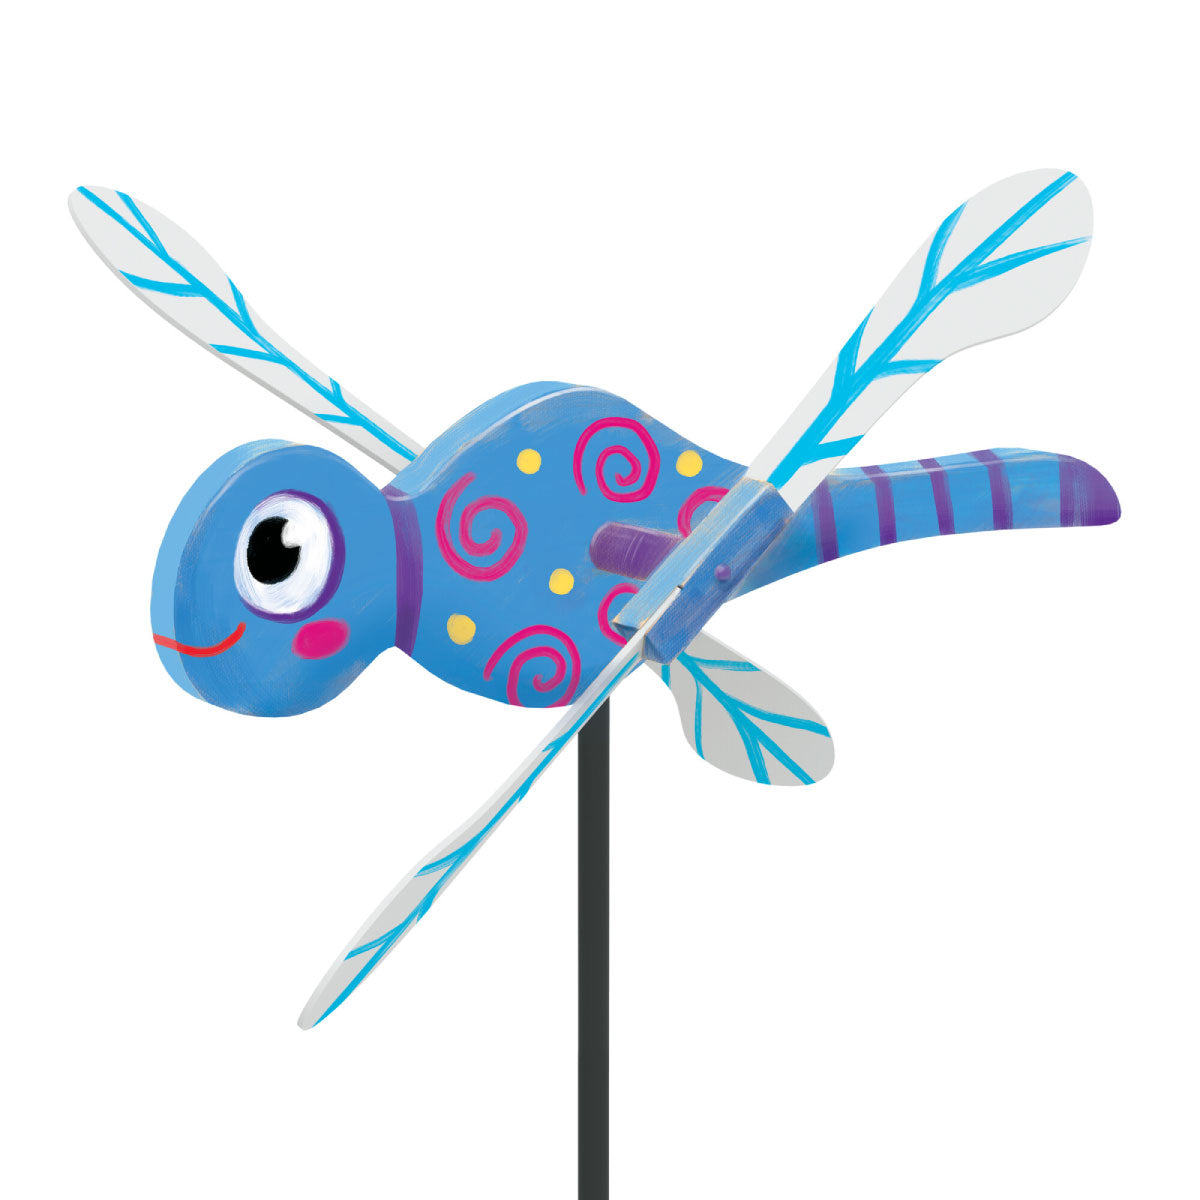 Mindware Make Your Own Dragonfly Wind Spinner Craft Kit